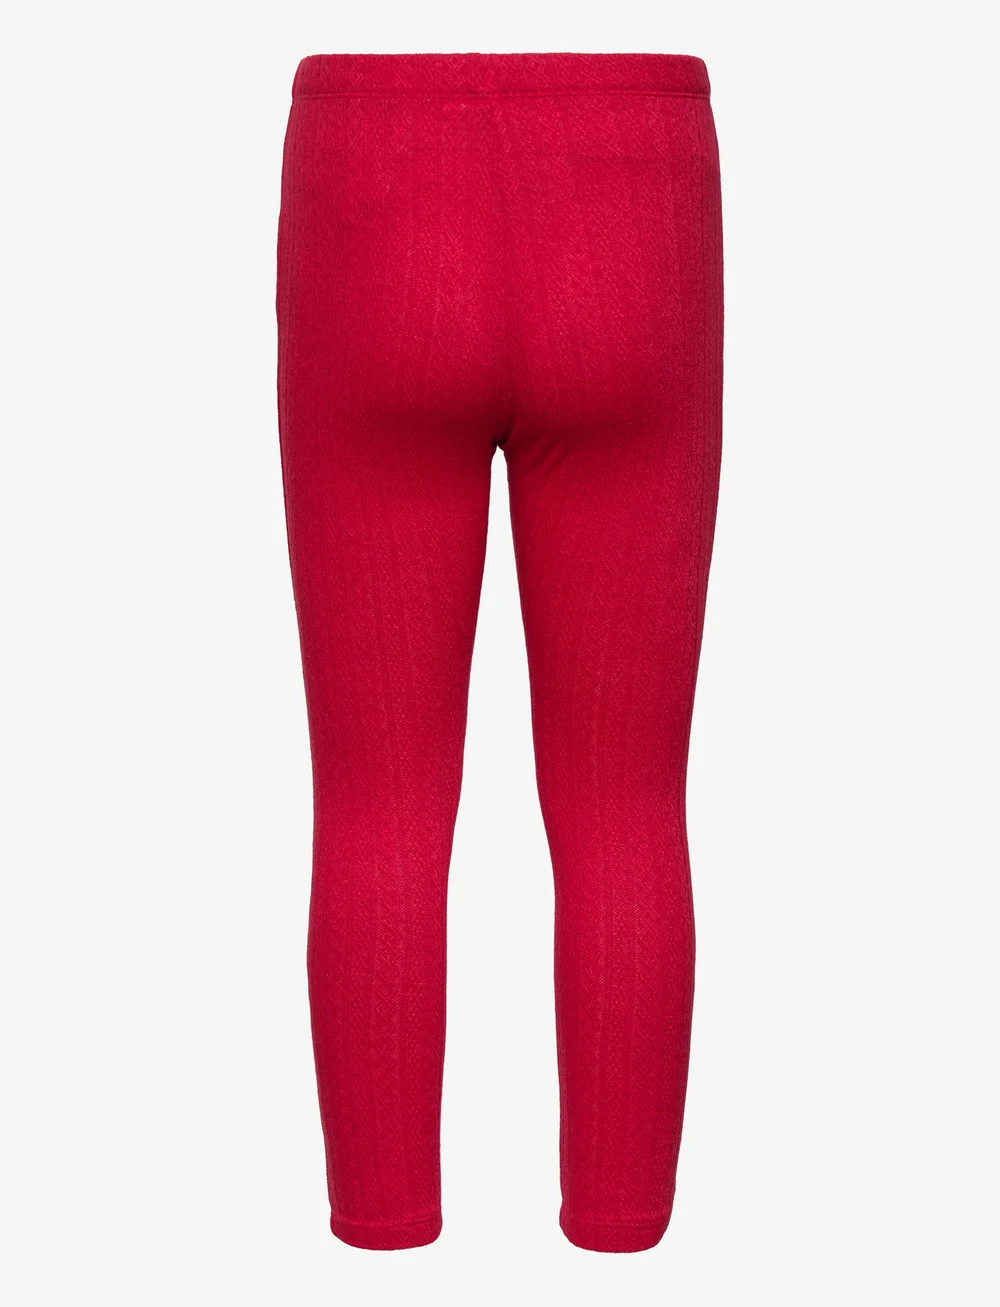 Lindex Leggings Patternknit Tricot - 9.74 €. Buy Ski from Lindex online at  . Fast delivery and easy returns